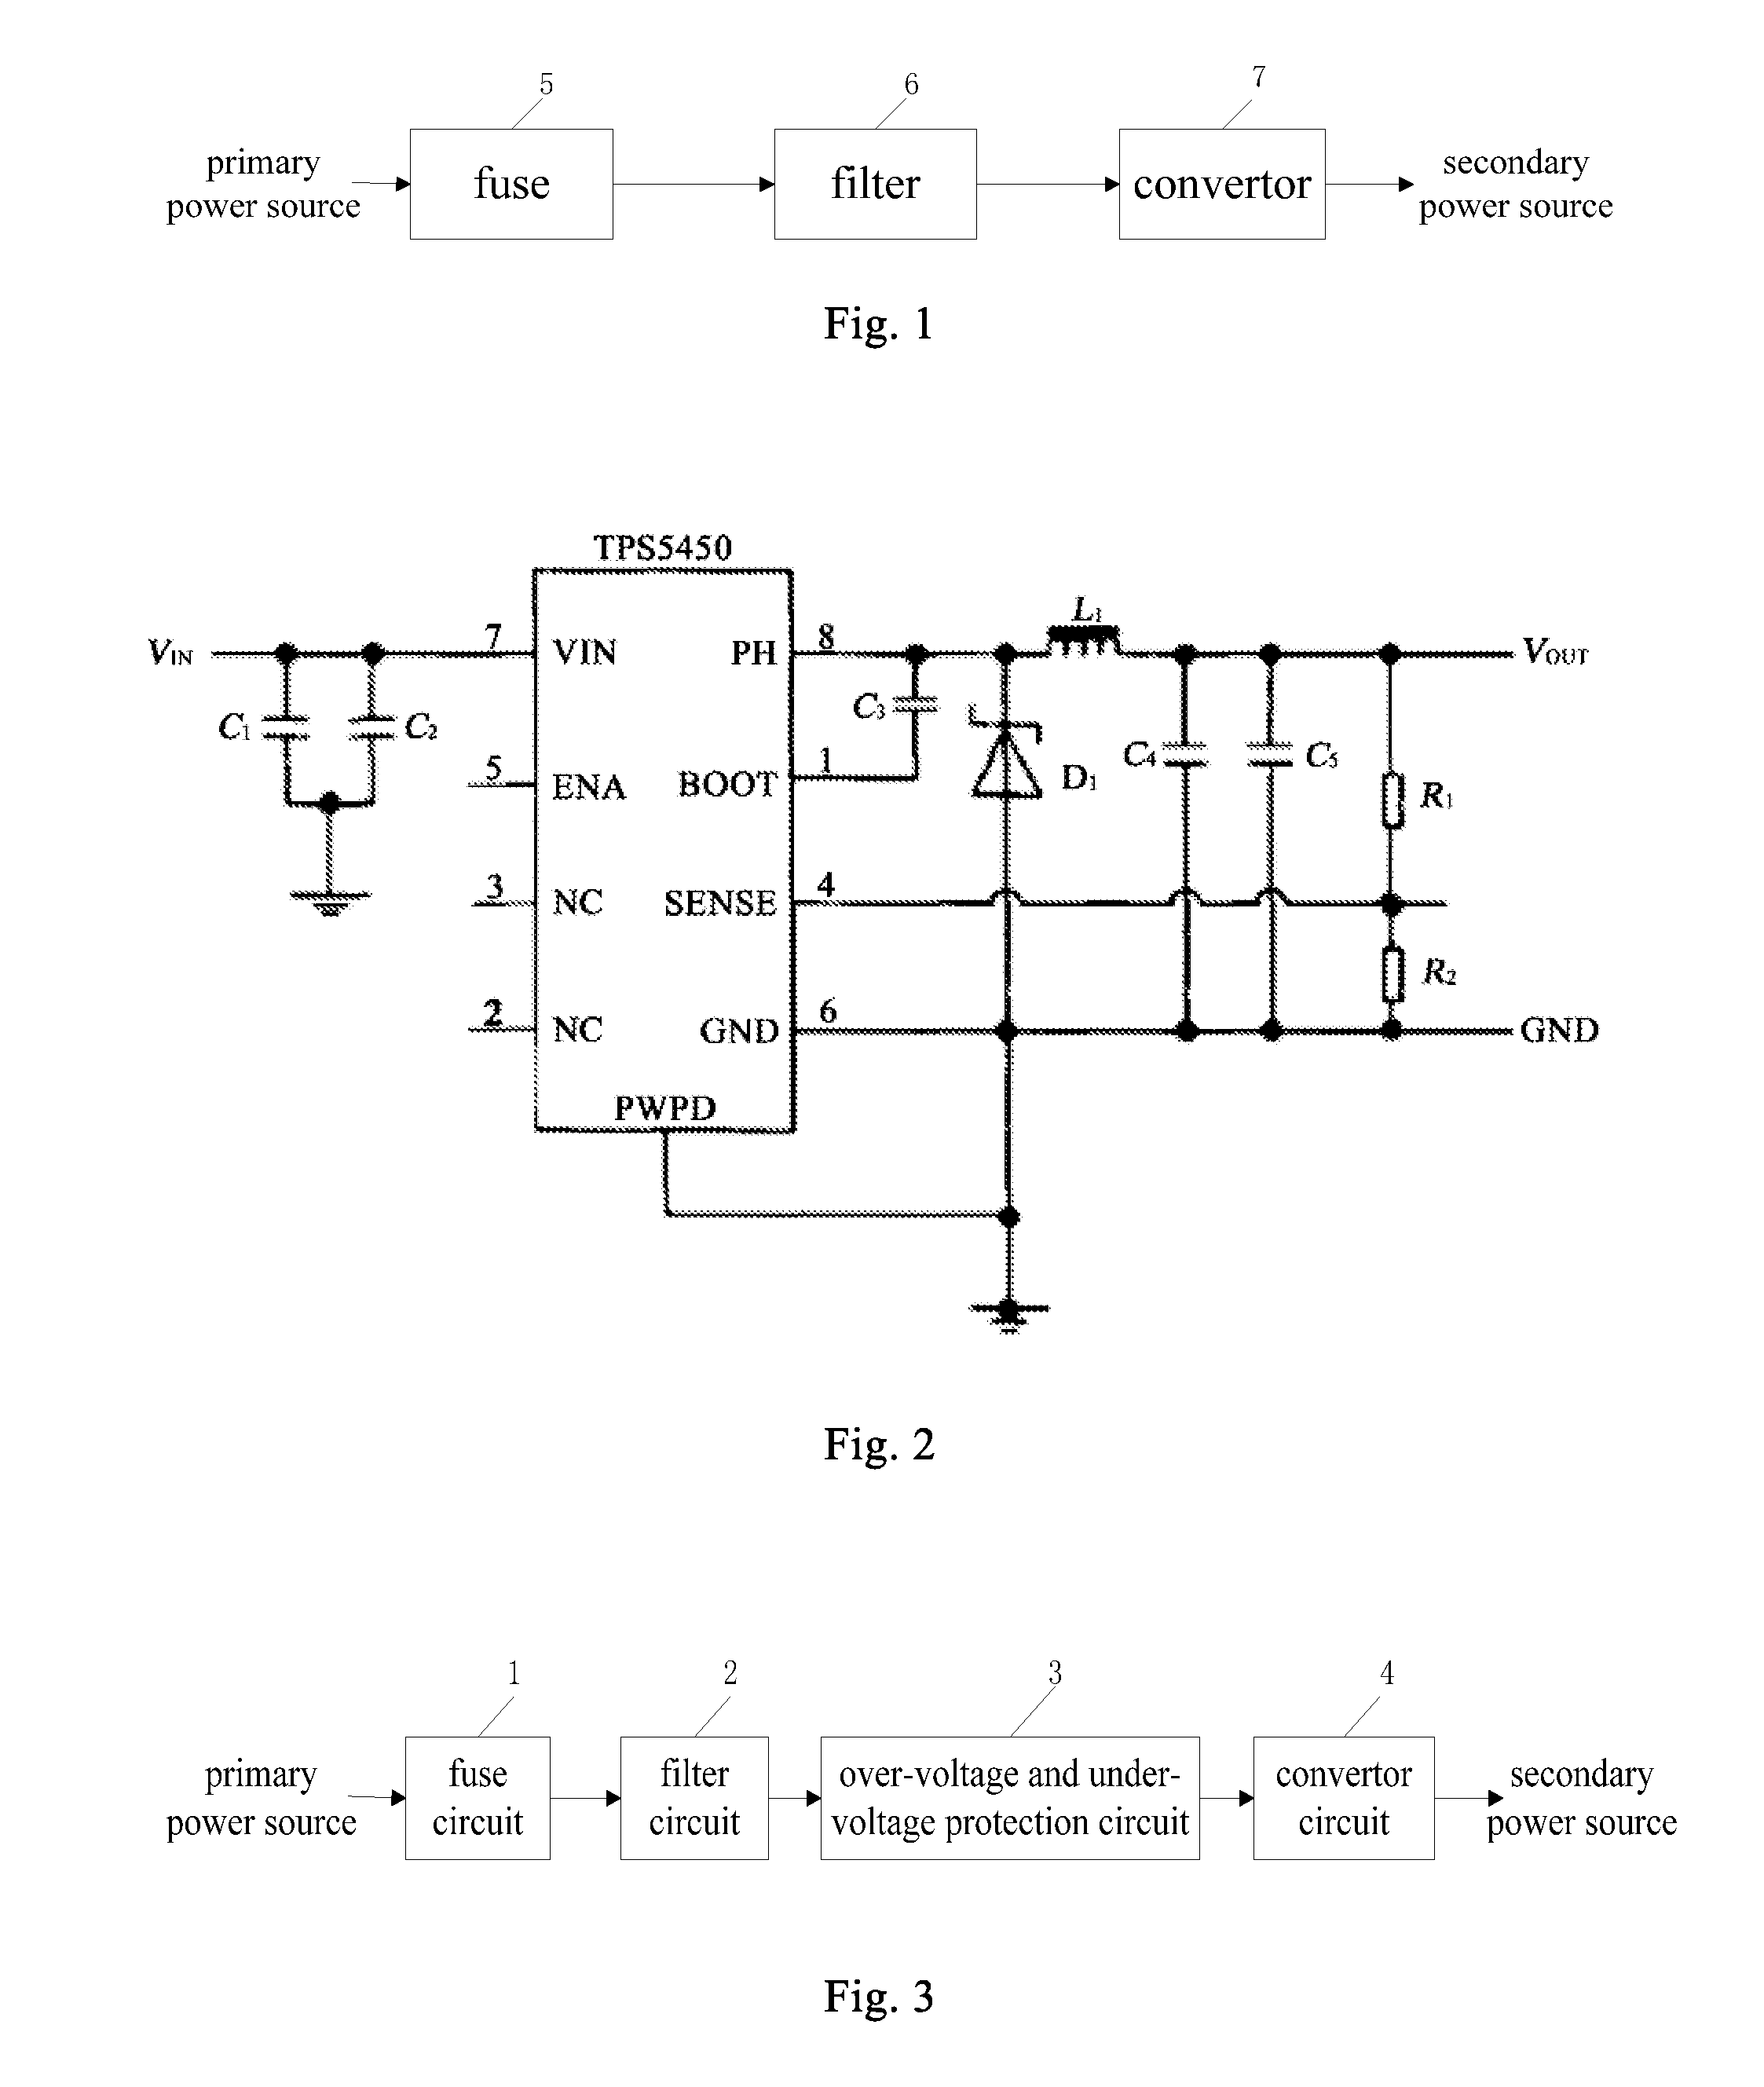 Secondary Power System and Power Supply Device